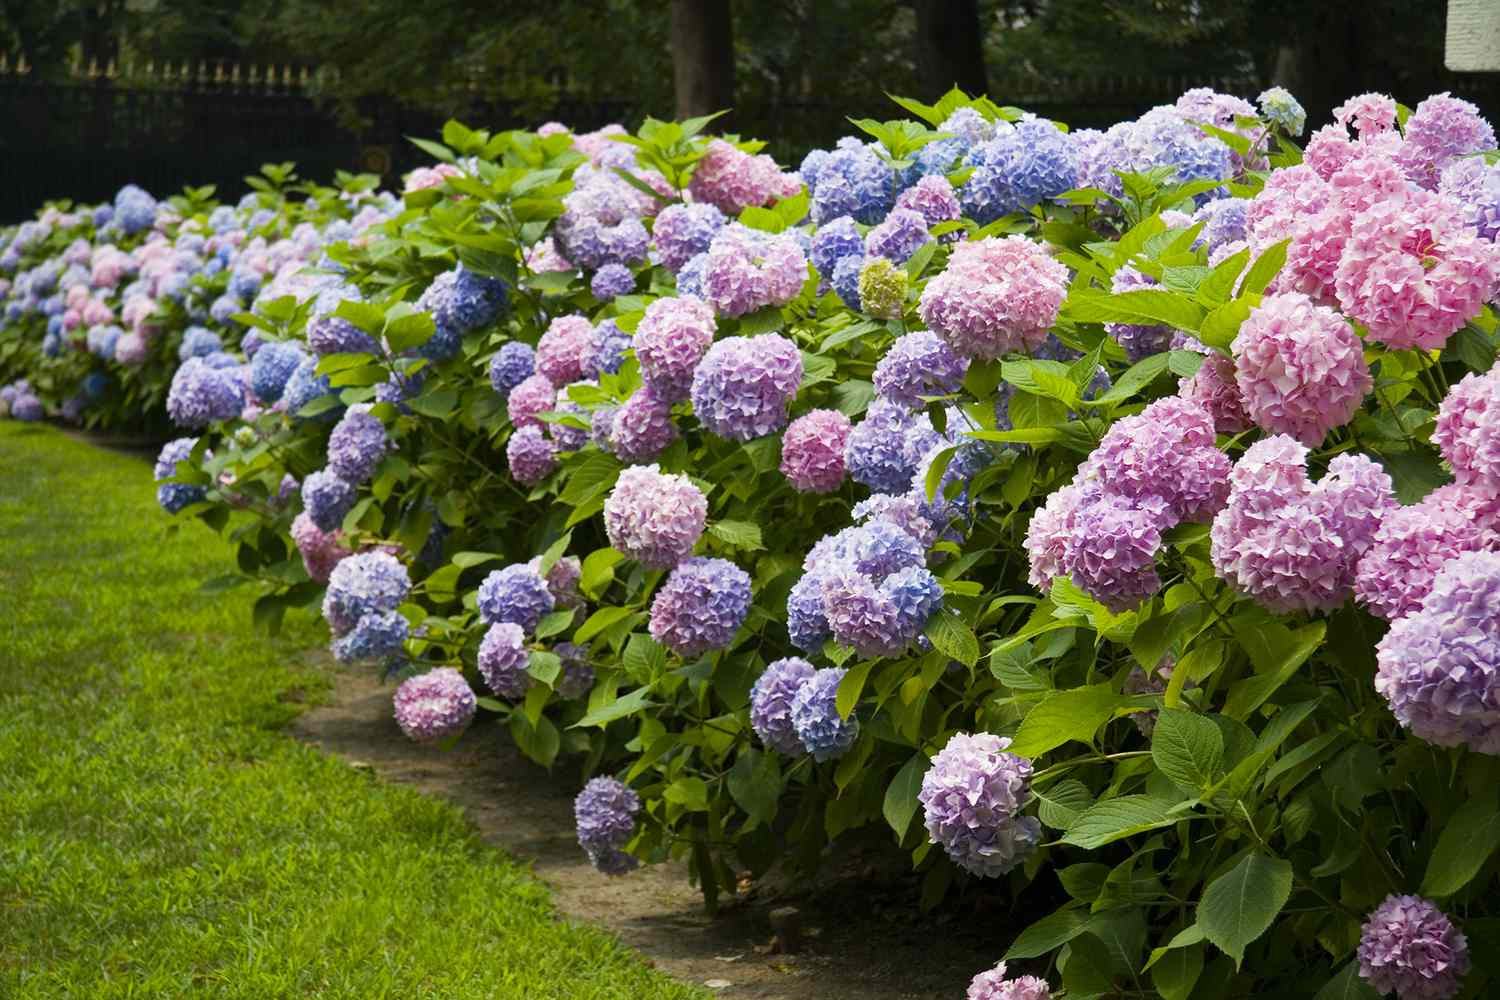 How To Care For Hydrangeas: From Gardens To Bouquets